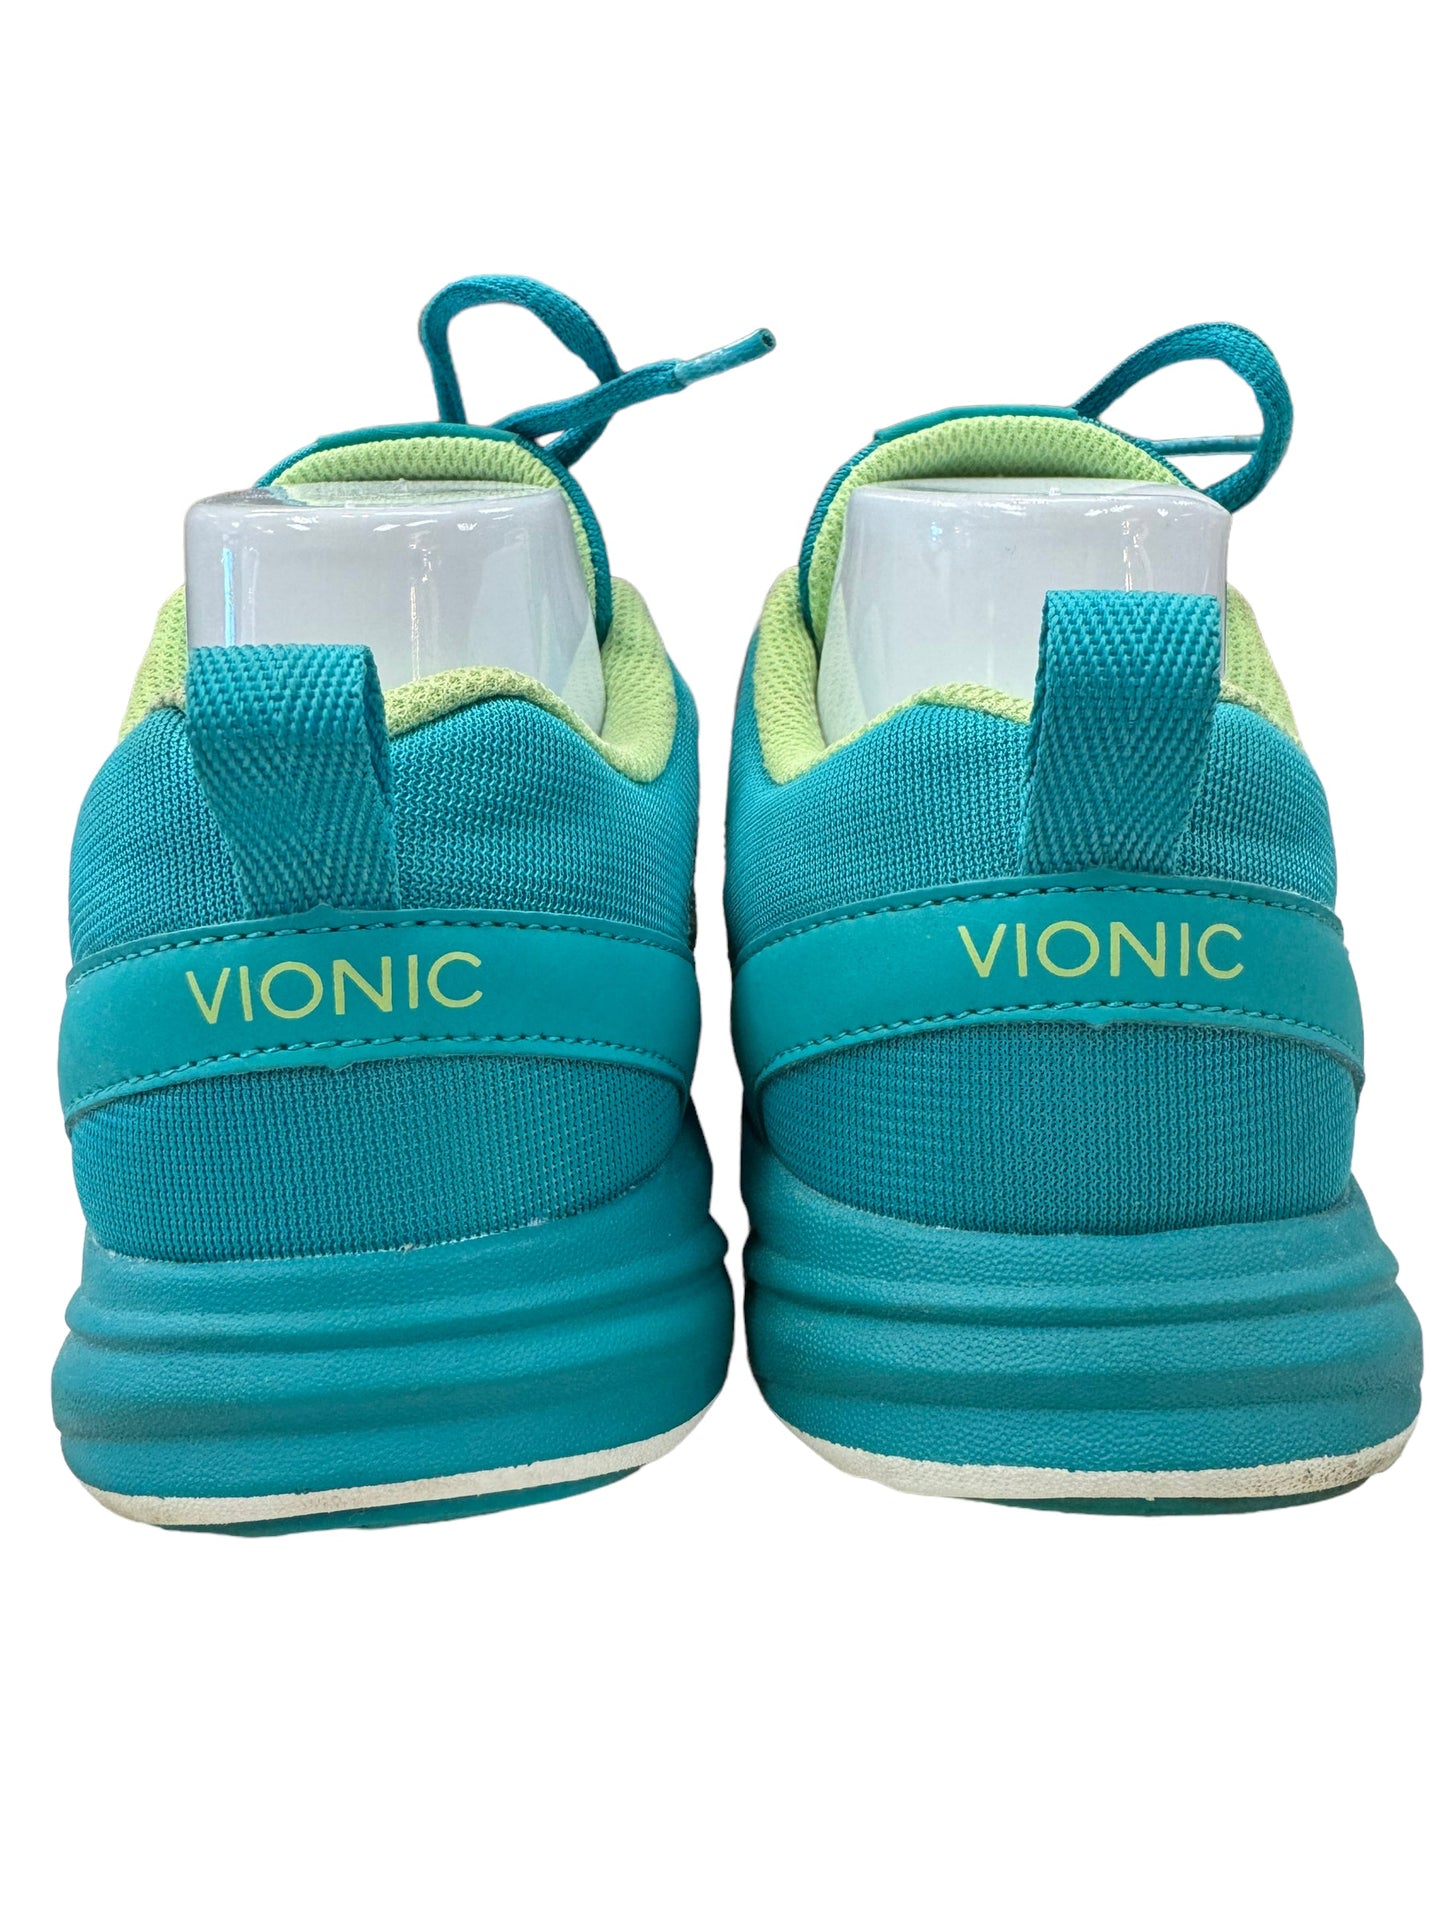 Green Shoes Athletic Vionic, Size 8